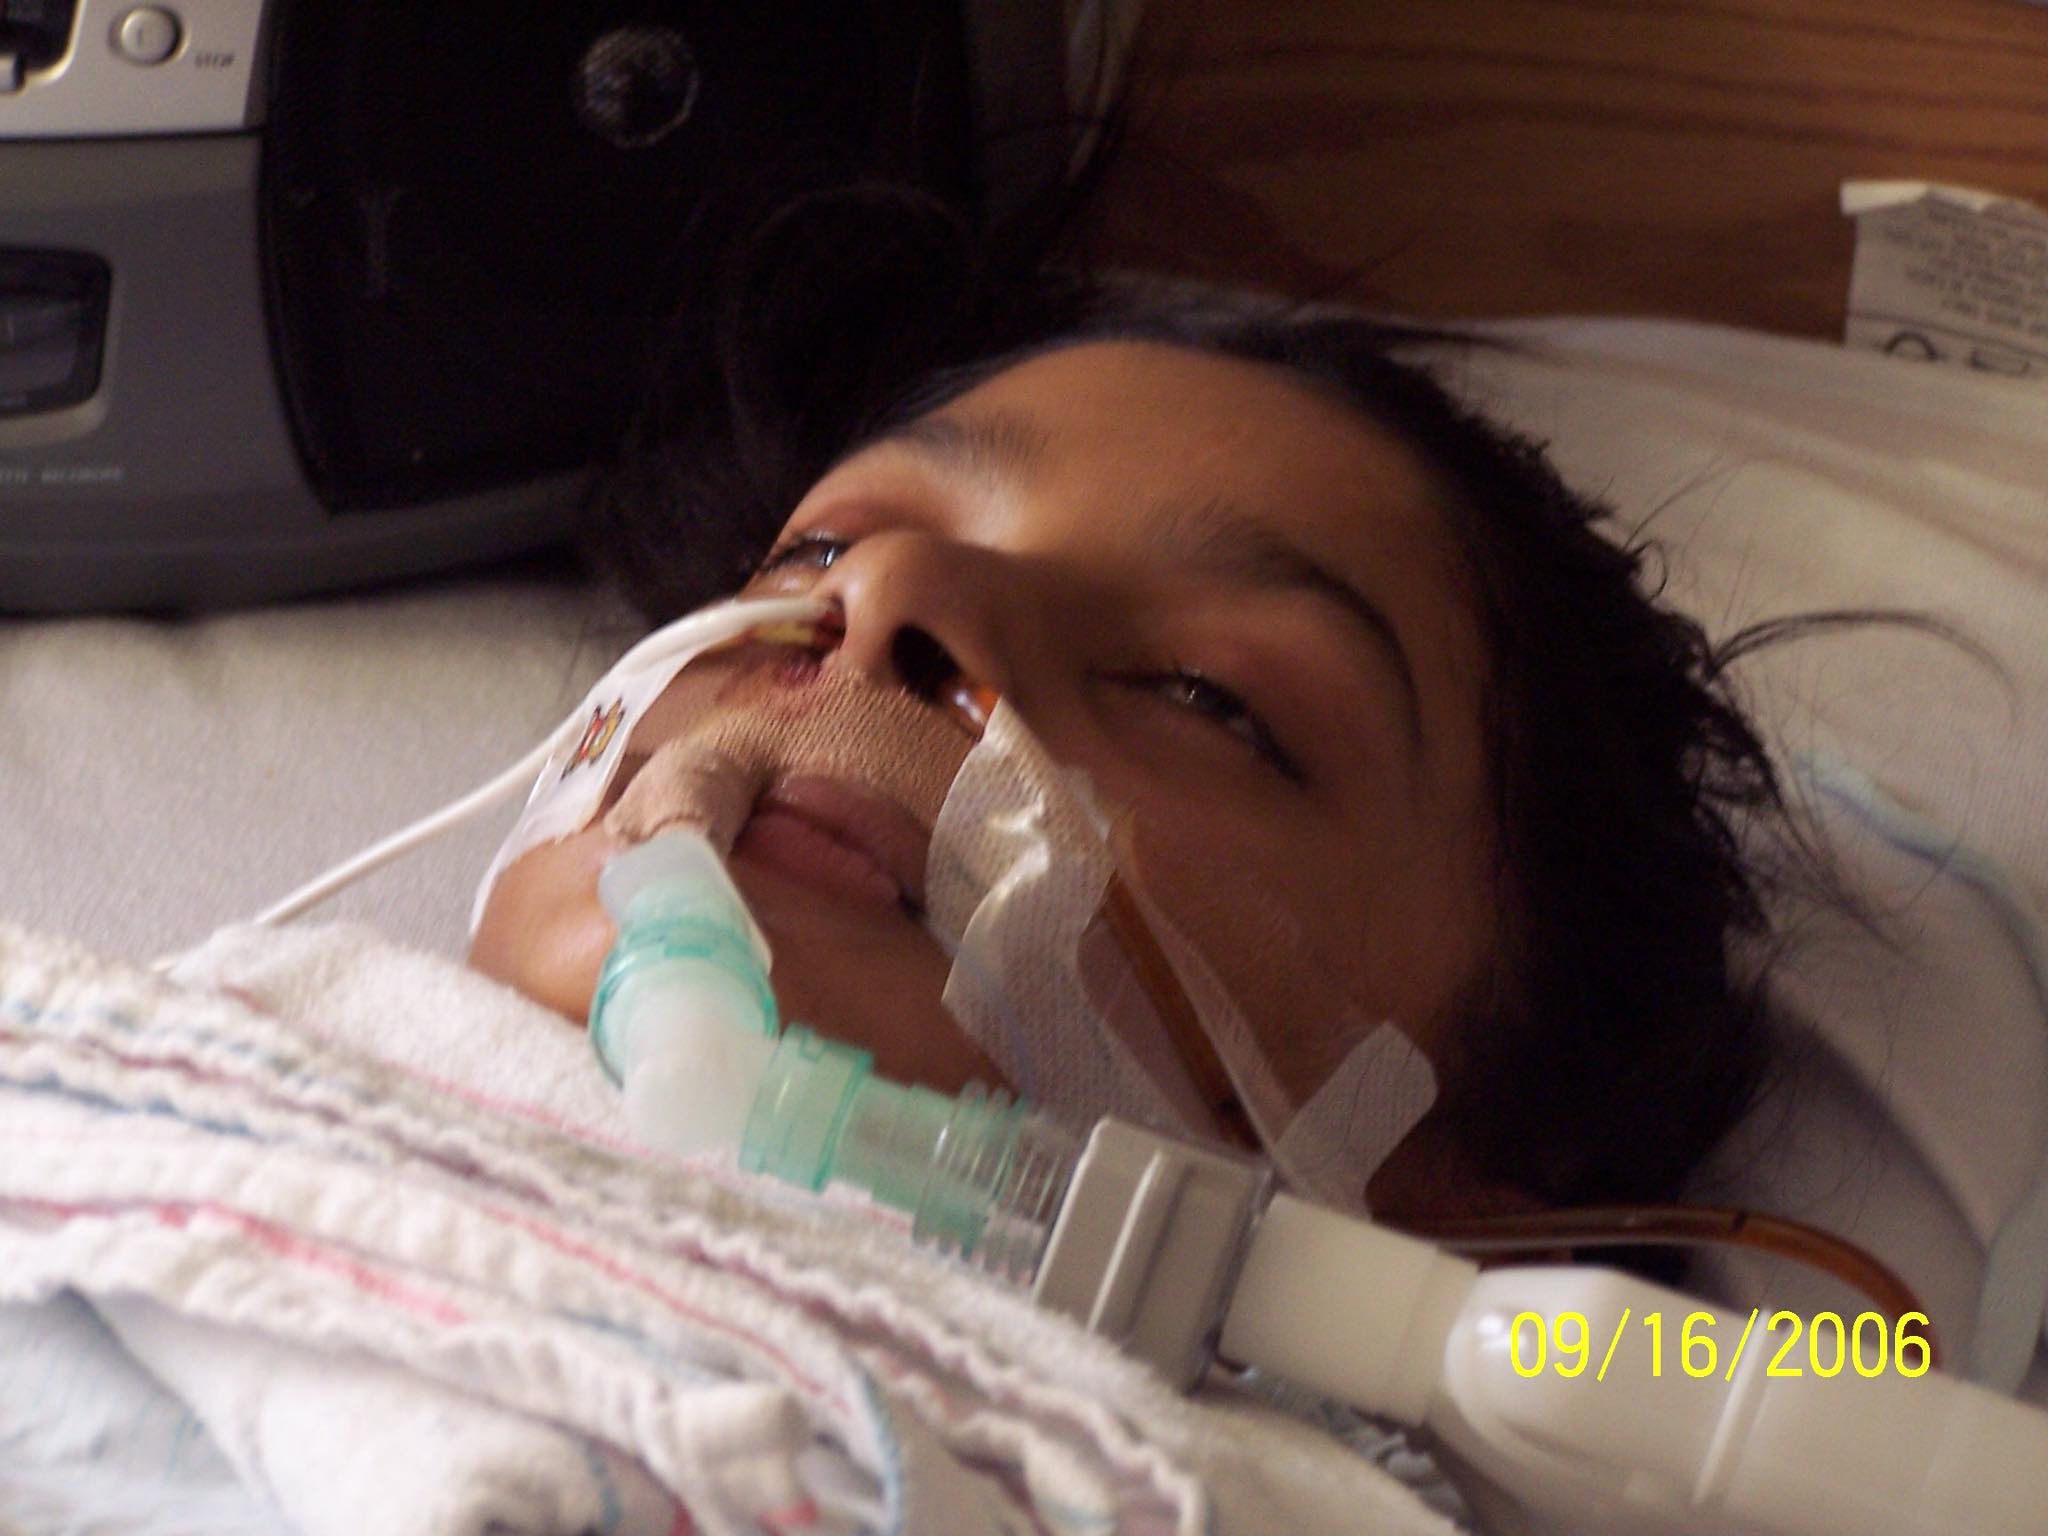 My Story: Theyd Pull The Plug From My Ventilator To Let Me Die, If I Didnt Show Any Improvements On My Birthday